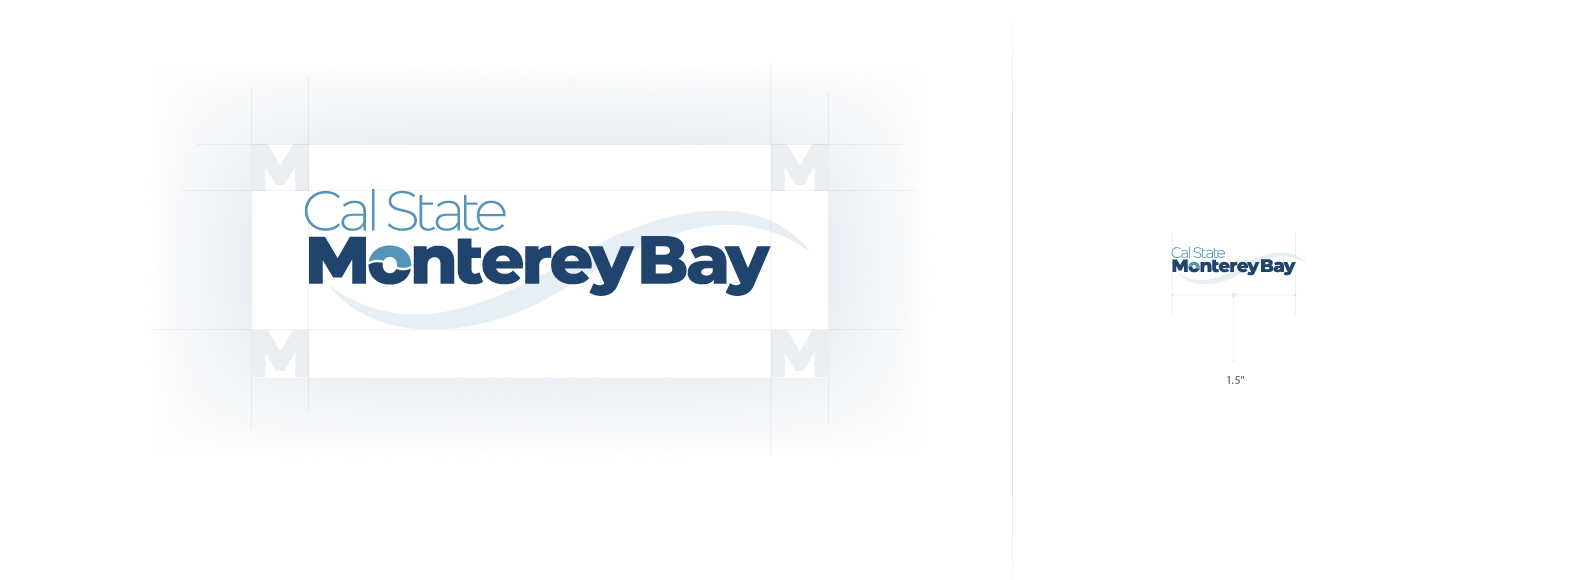 Cal State Monterey Bay Logo with clear space direction showing 